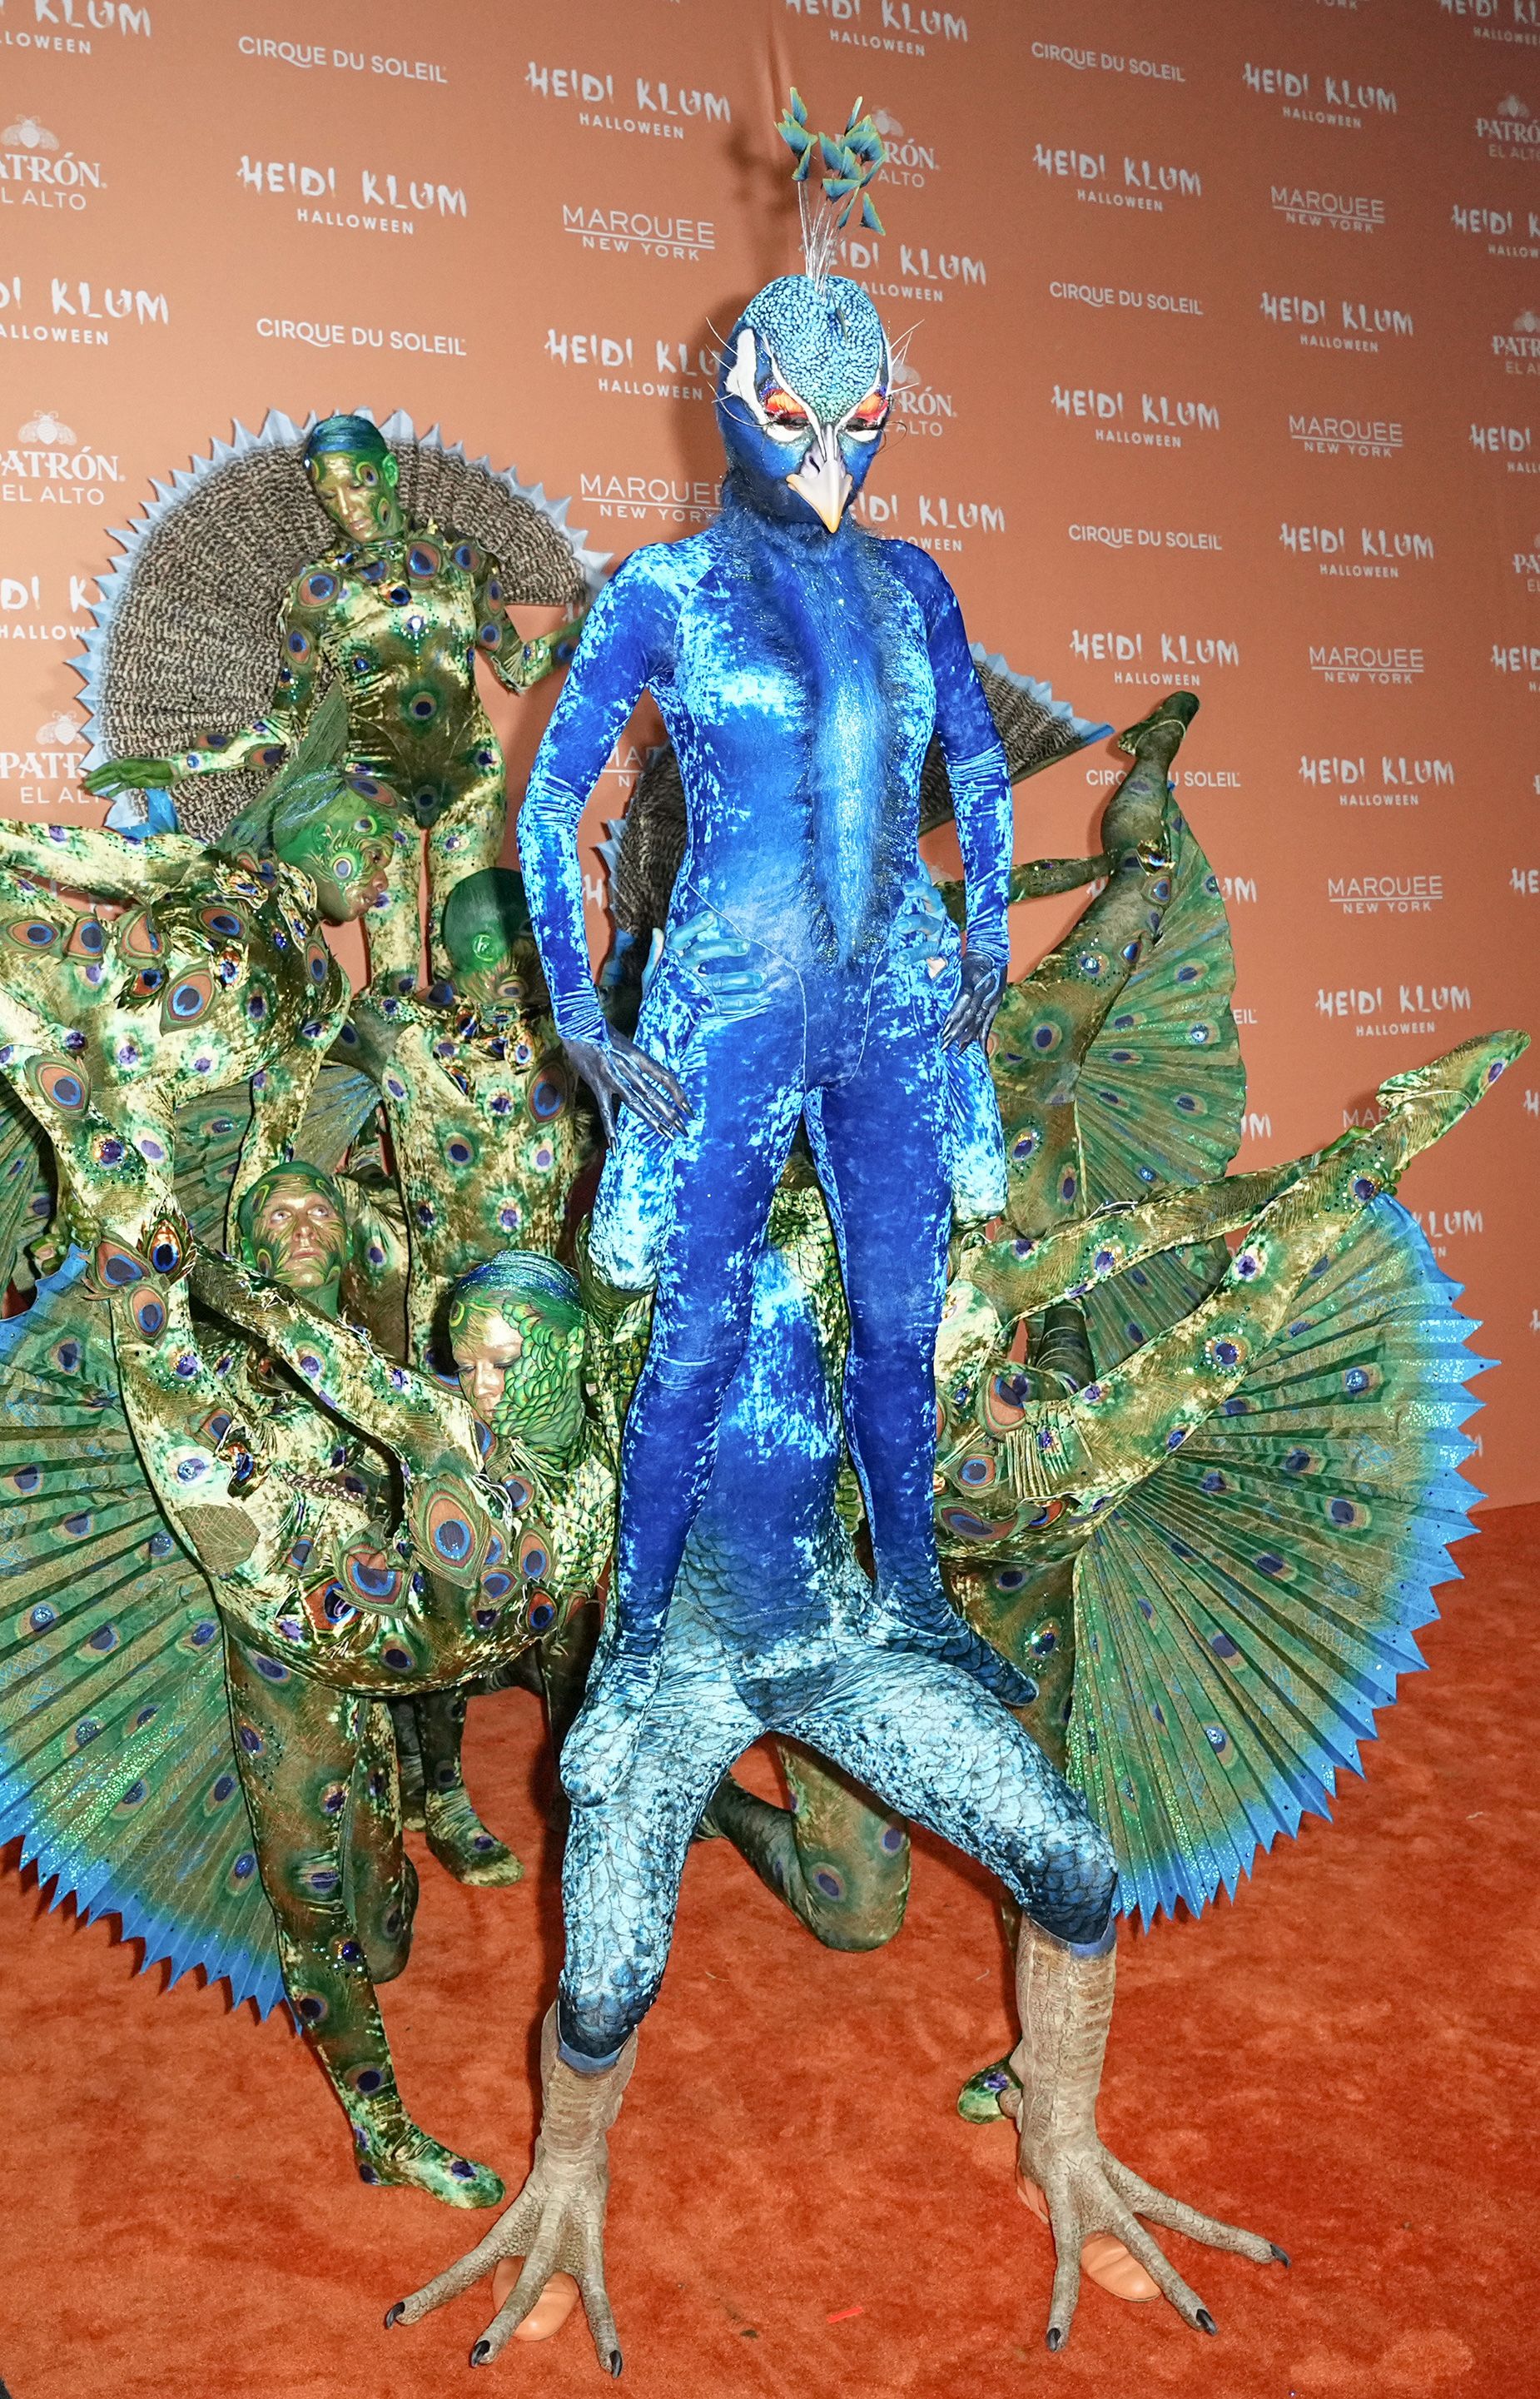 Queen of Halloween, Heidi Klum, came dressed as a peacock — her costume was completed by a team of acrobats dressed as her plume of feathers.